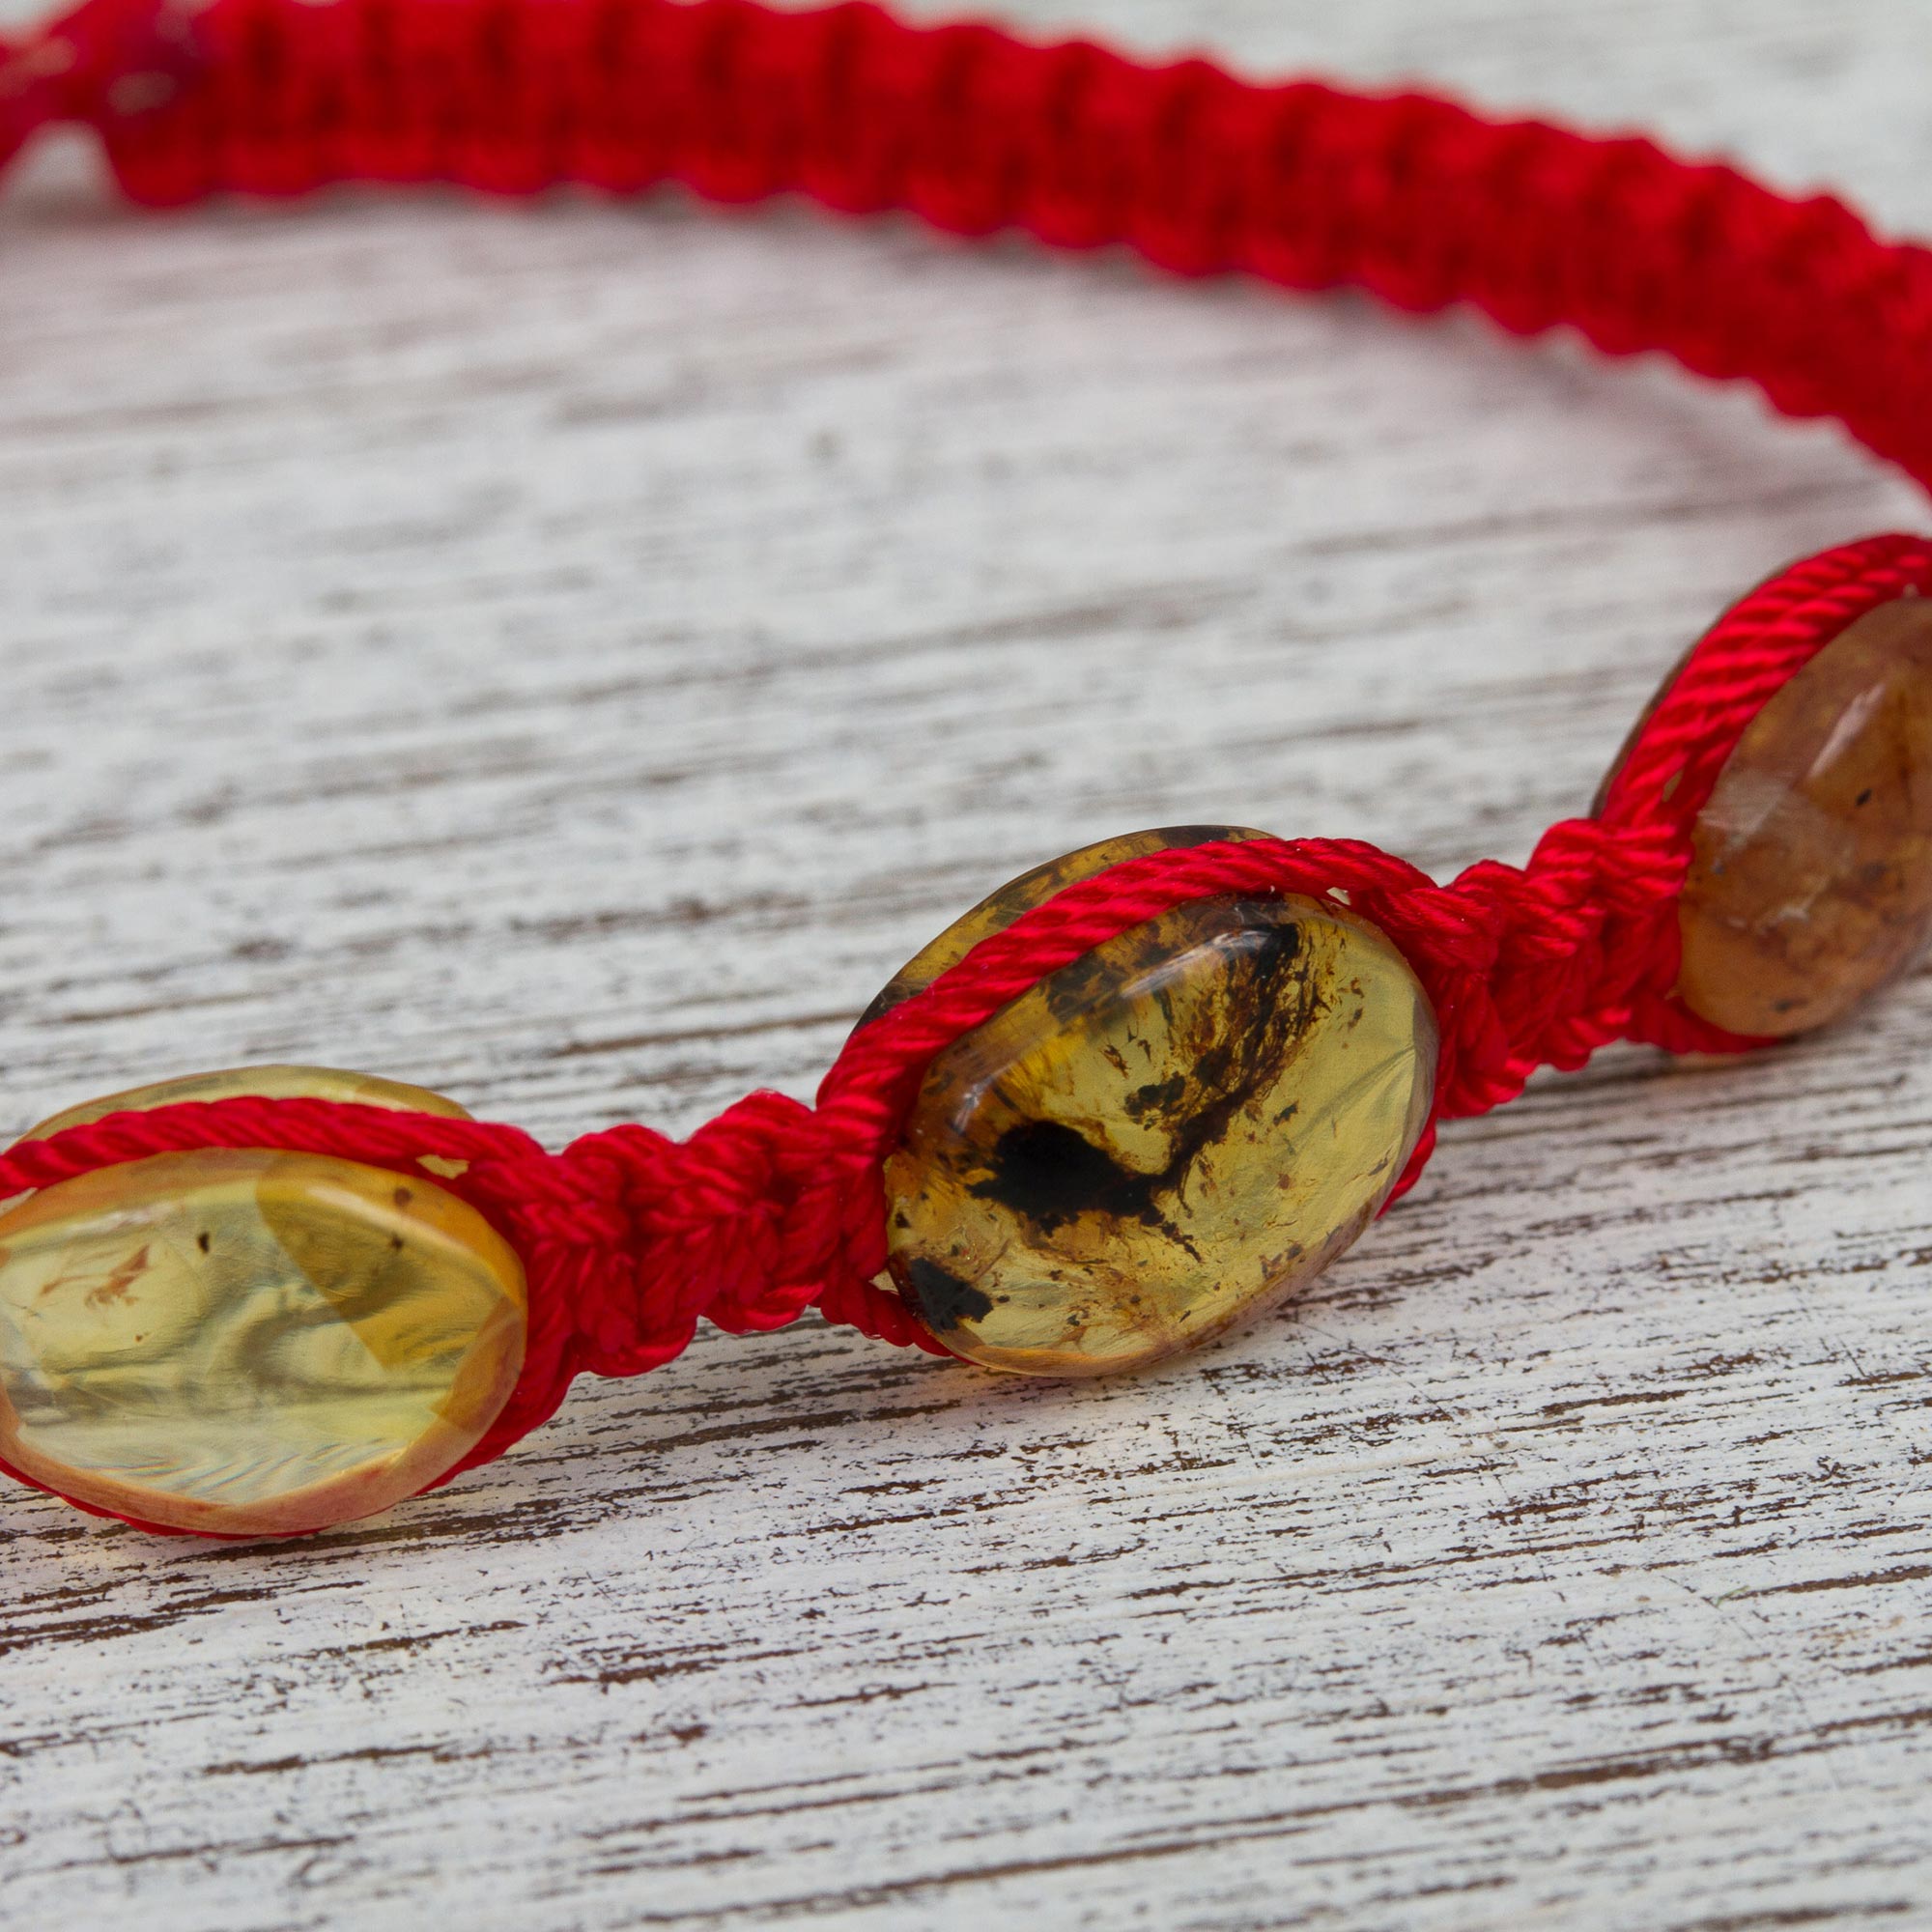 Red Nylon Braided Bracelet with Amber Beads from Mexico - Amber Passion